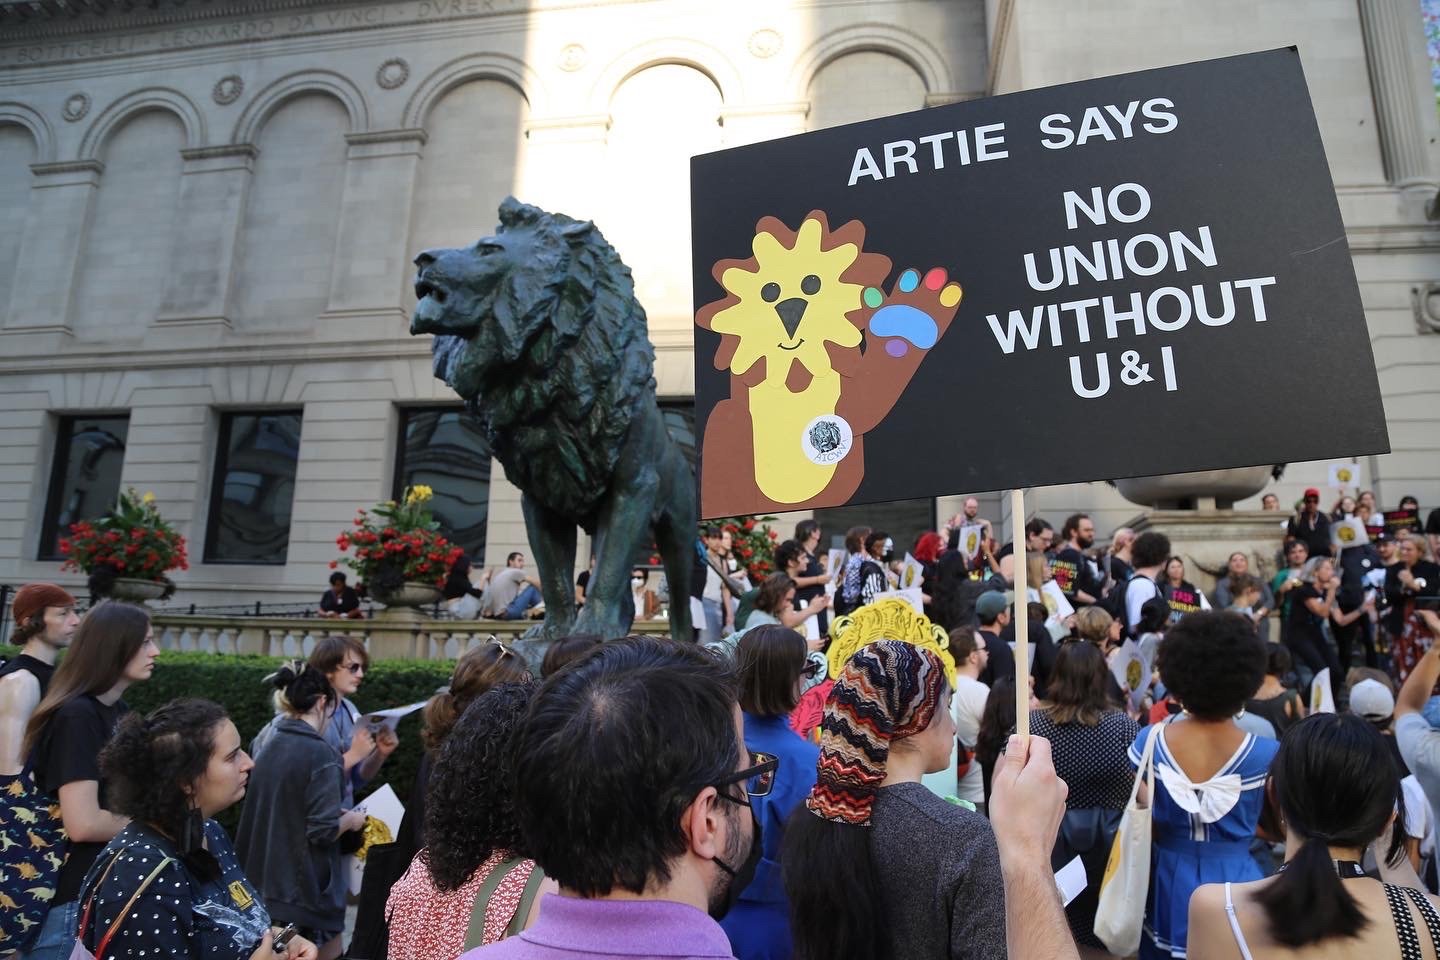 Image: a group of people congregating in front of the Art Institute of Chicago, a grey building. In the mid-ground is an oxidized copper lion sculpture. In the foreground is a person holding a black sign with a cartoon lion that says in white text, "ARTIE SAYS NO UNION WITHOUT US!" Image courtesy of AICWU/AFSCME.